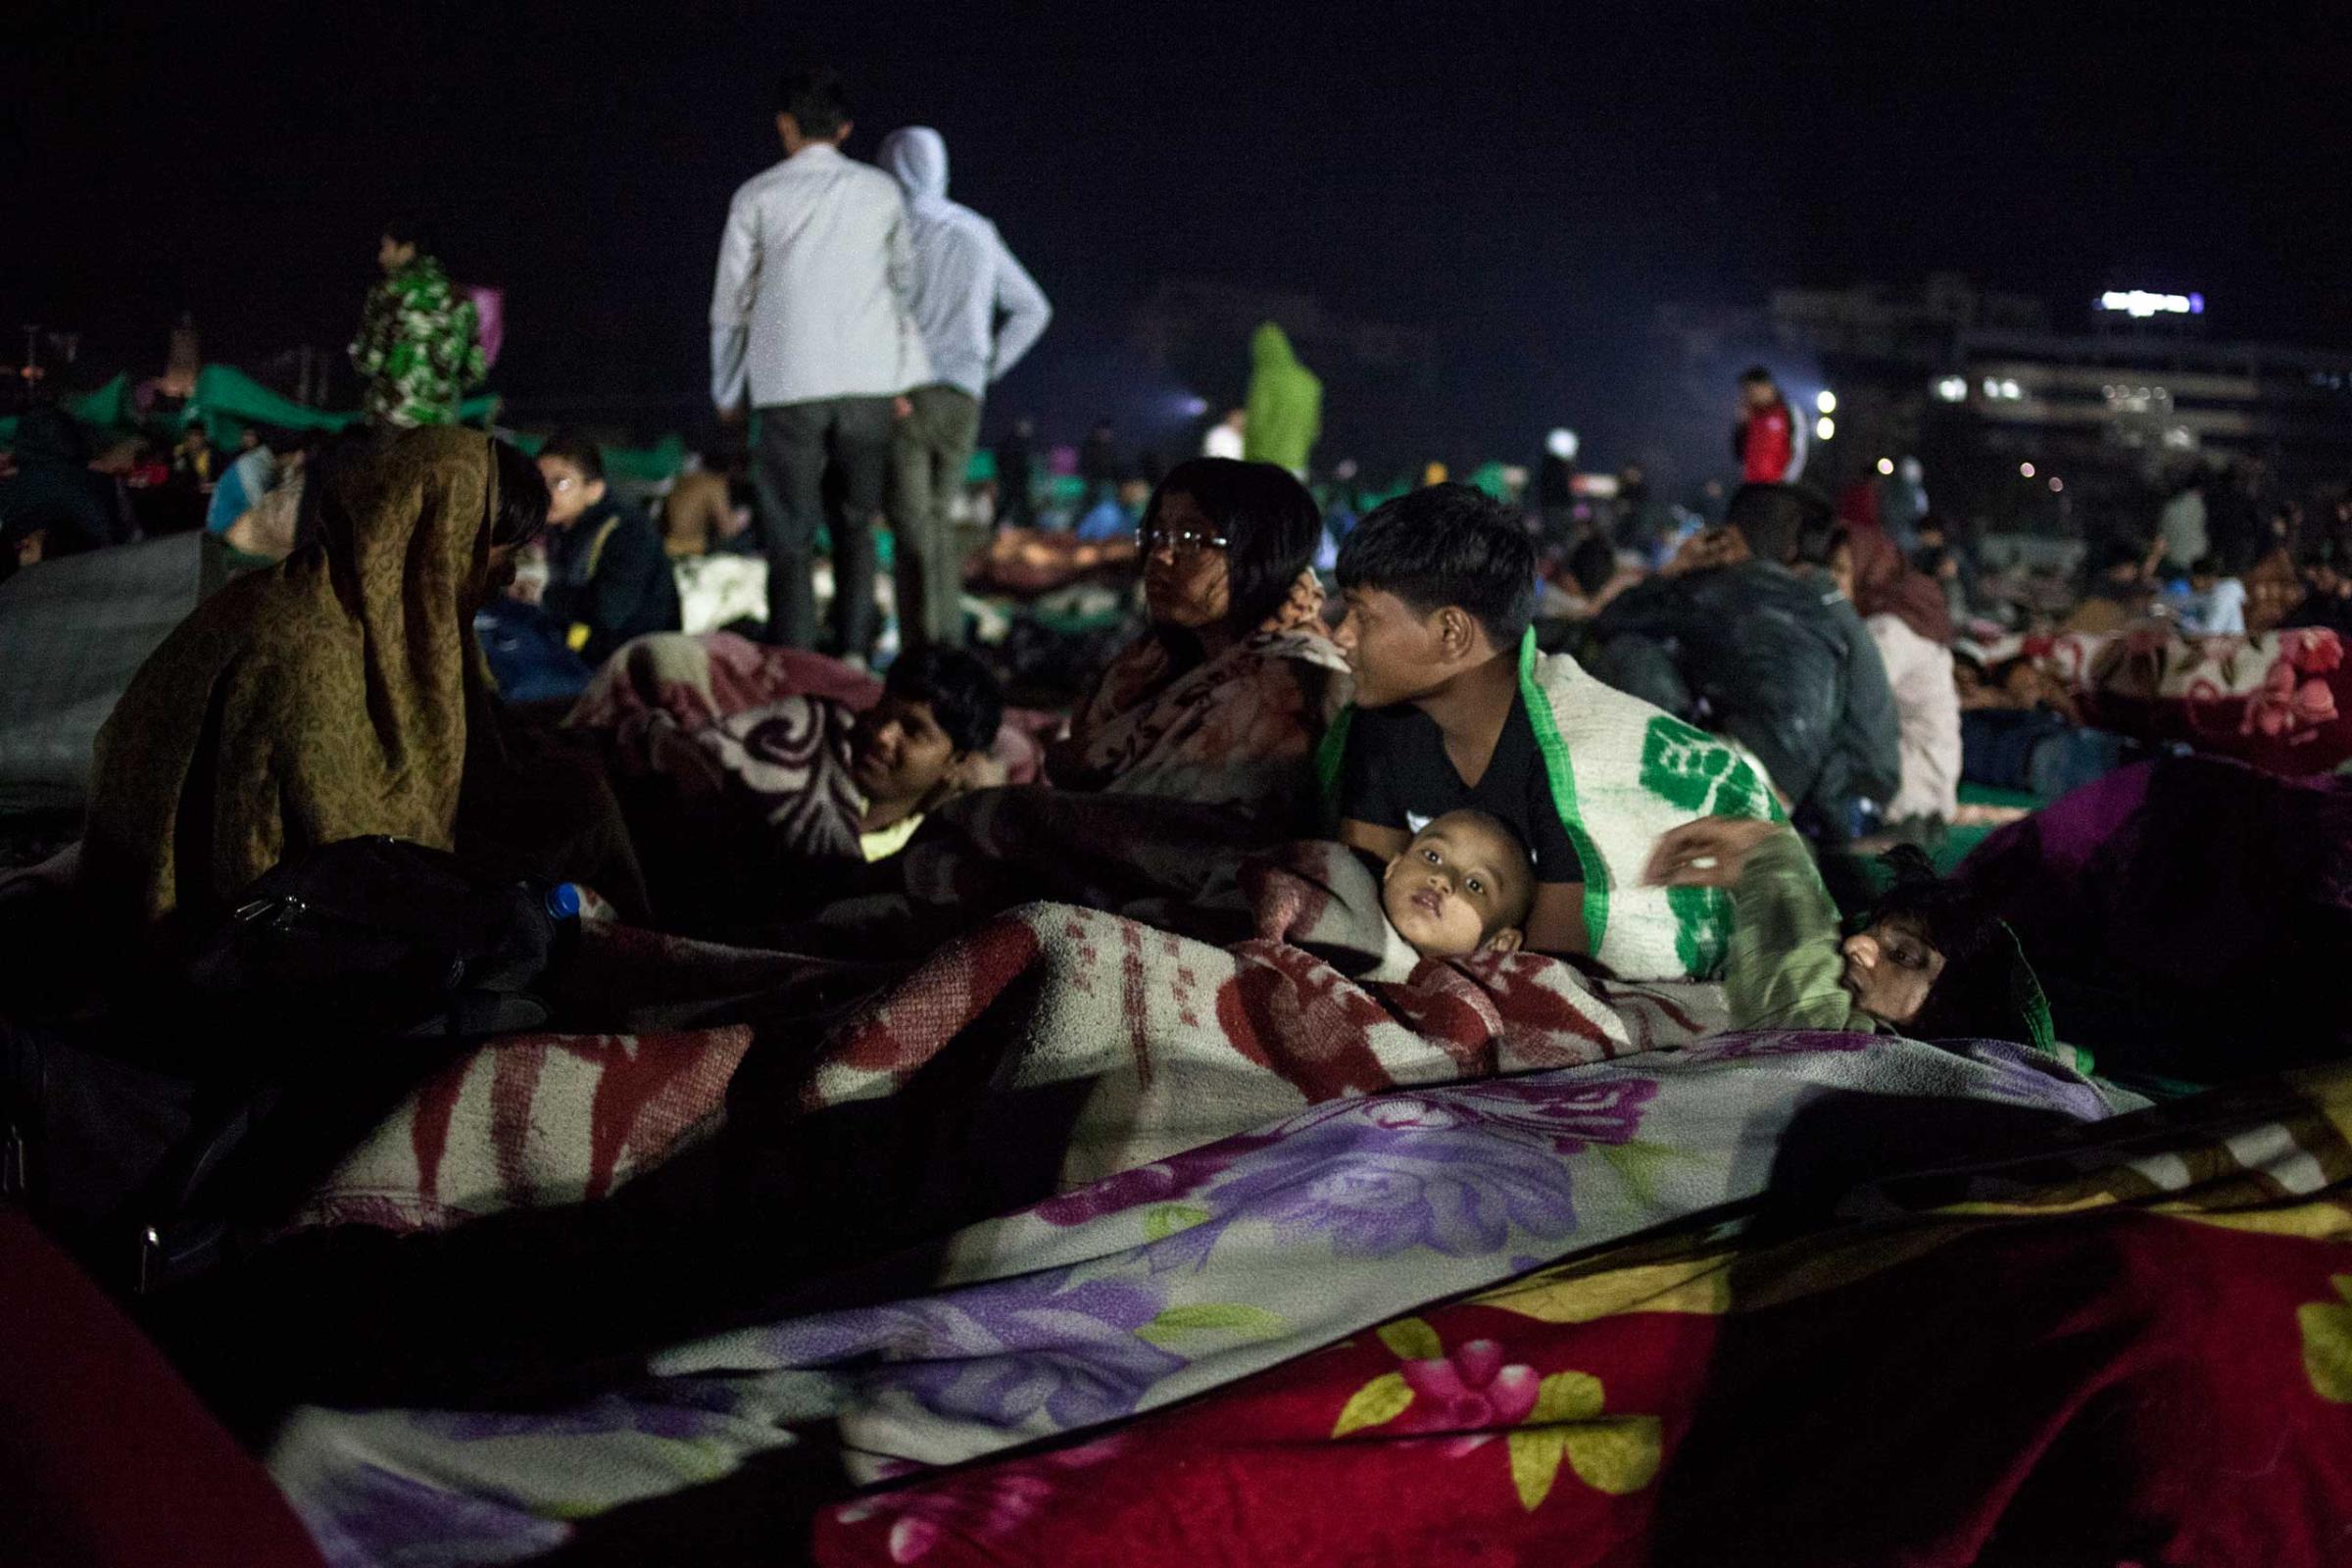 People gathered at Tundikhel, an open ground in central Kathmandu, Nepal, on April 25, 2015. Many families spent their nights there in fear of aftershocks.